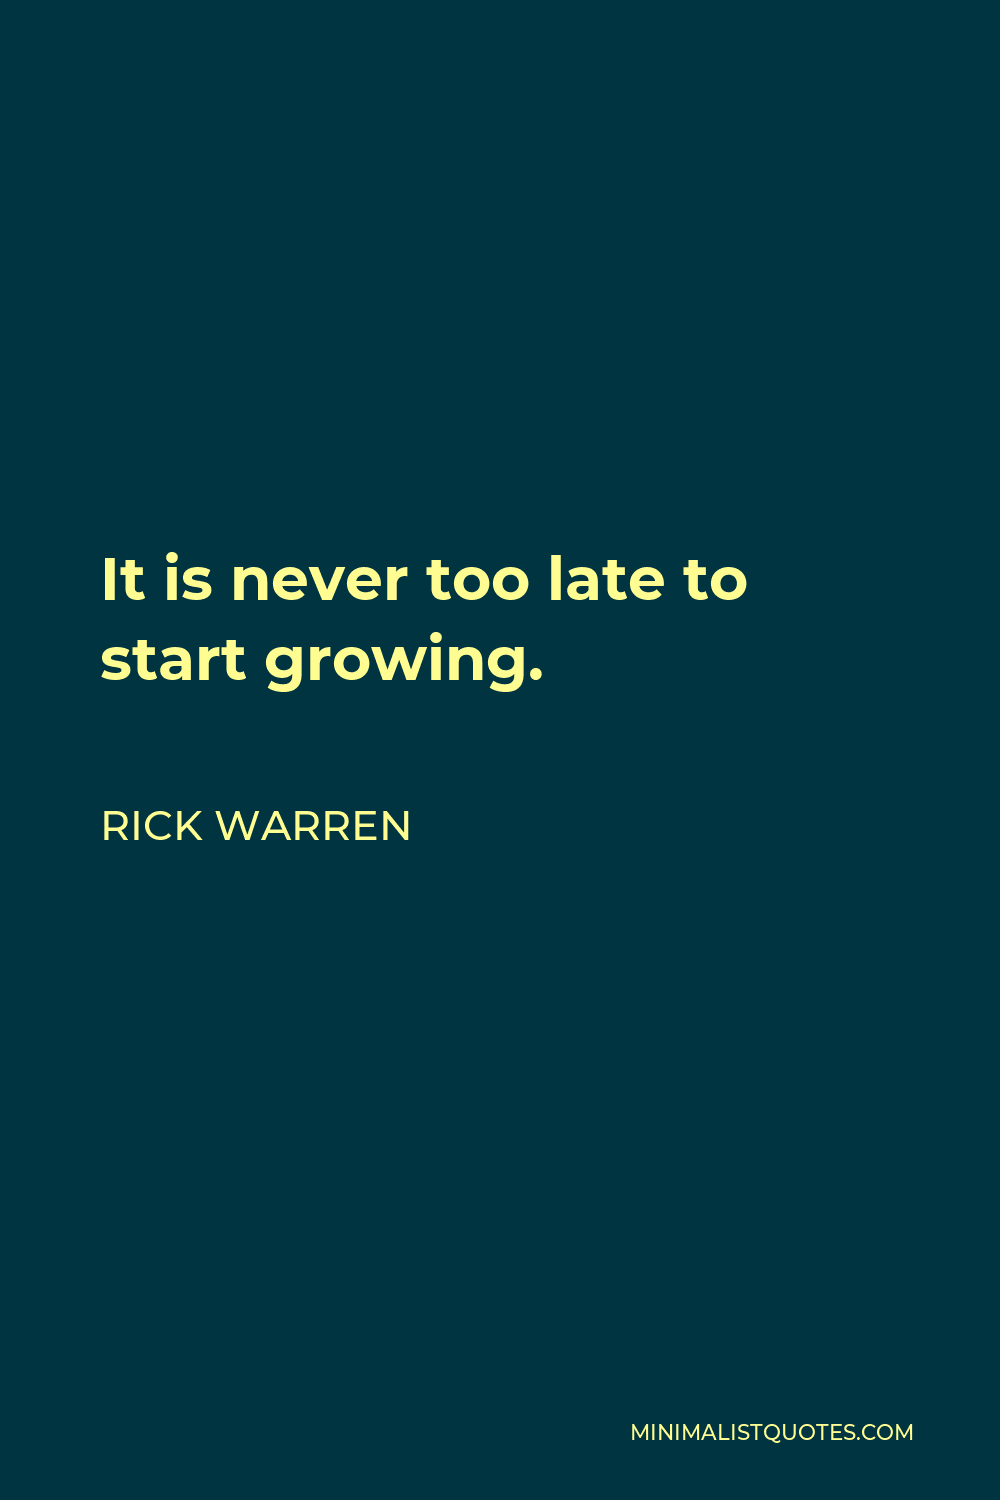 Rick Warren Quote - It is never too late to start growing.